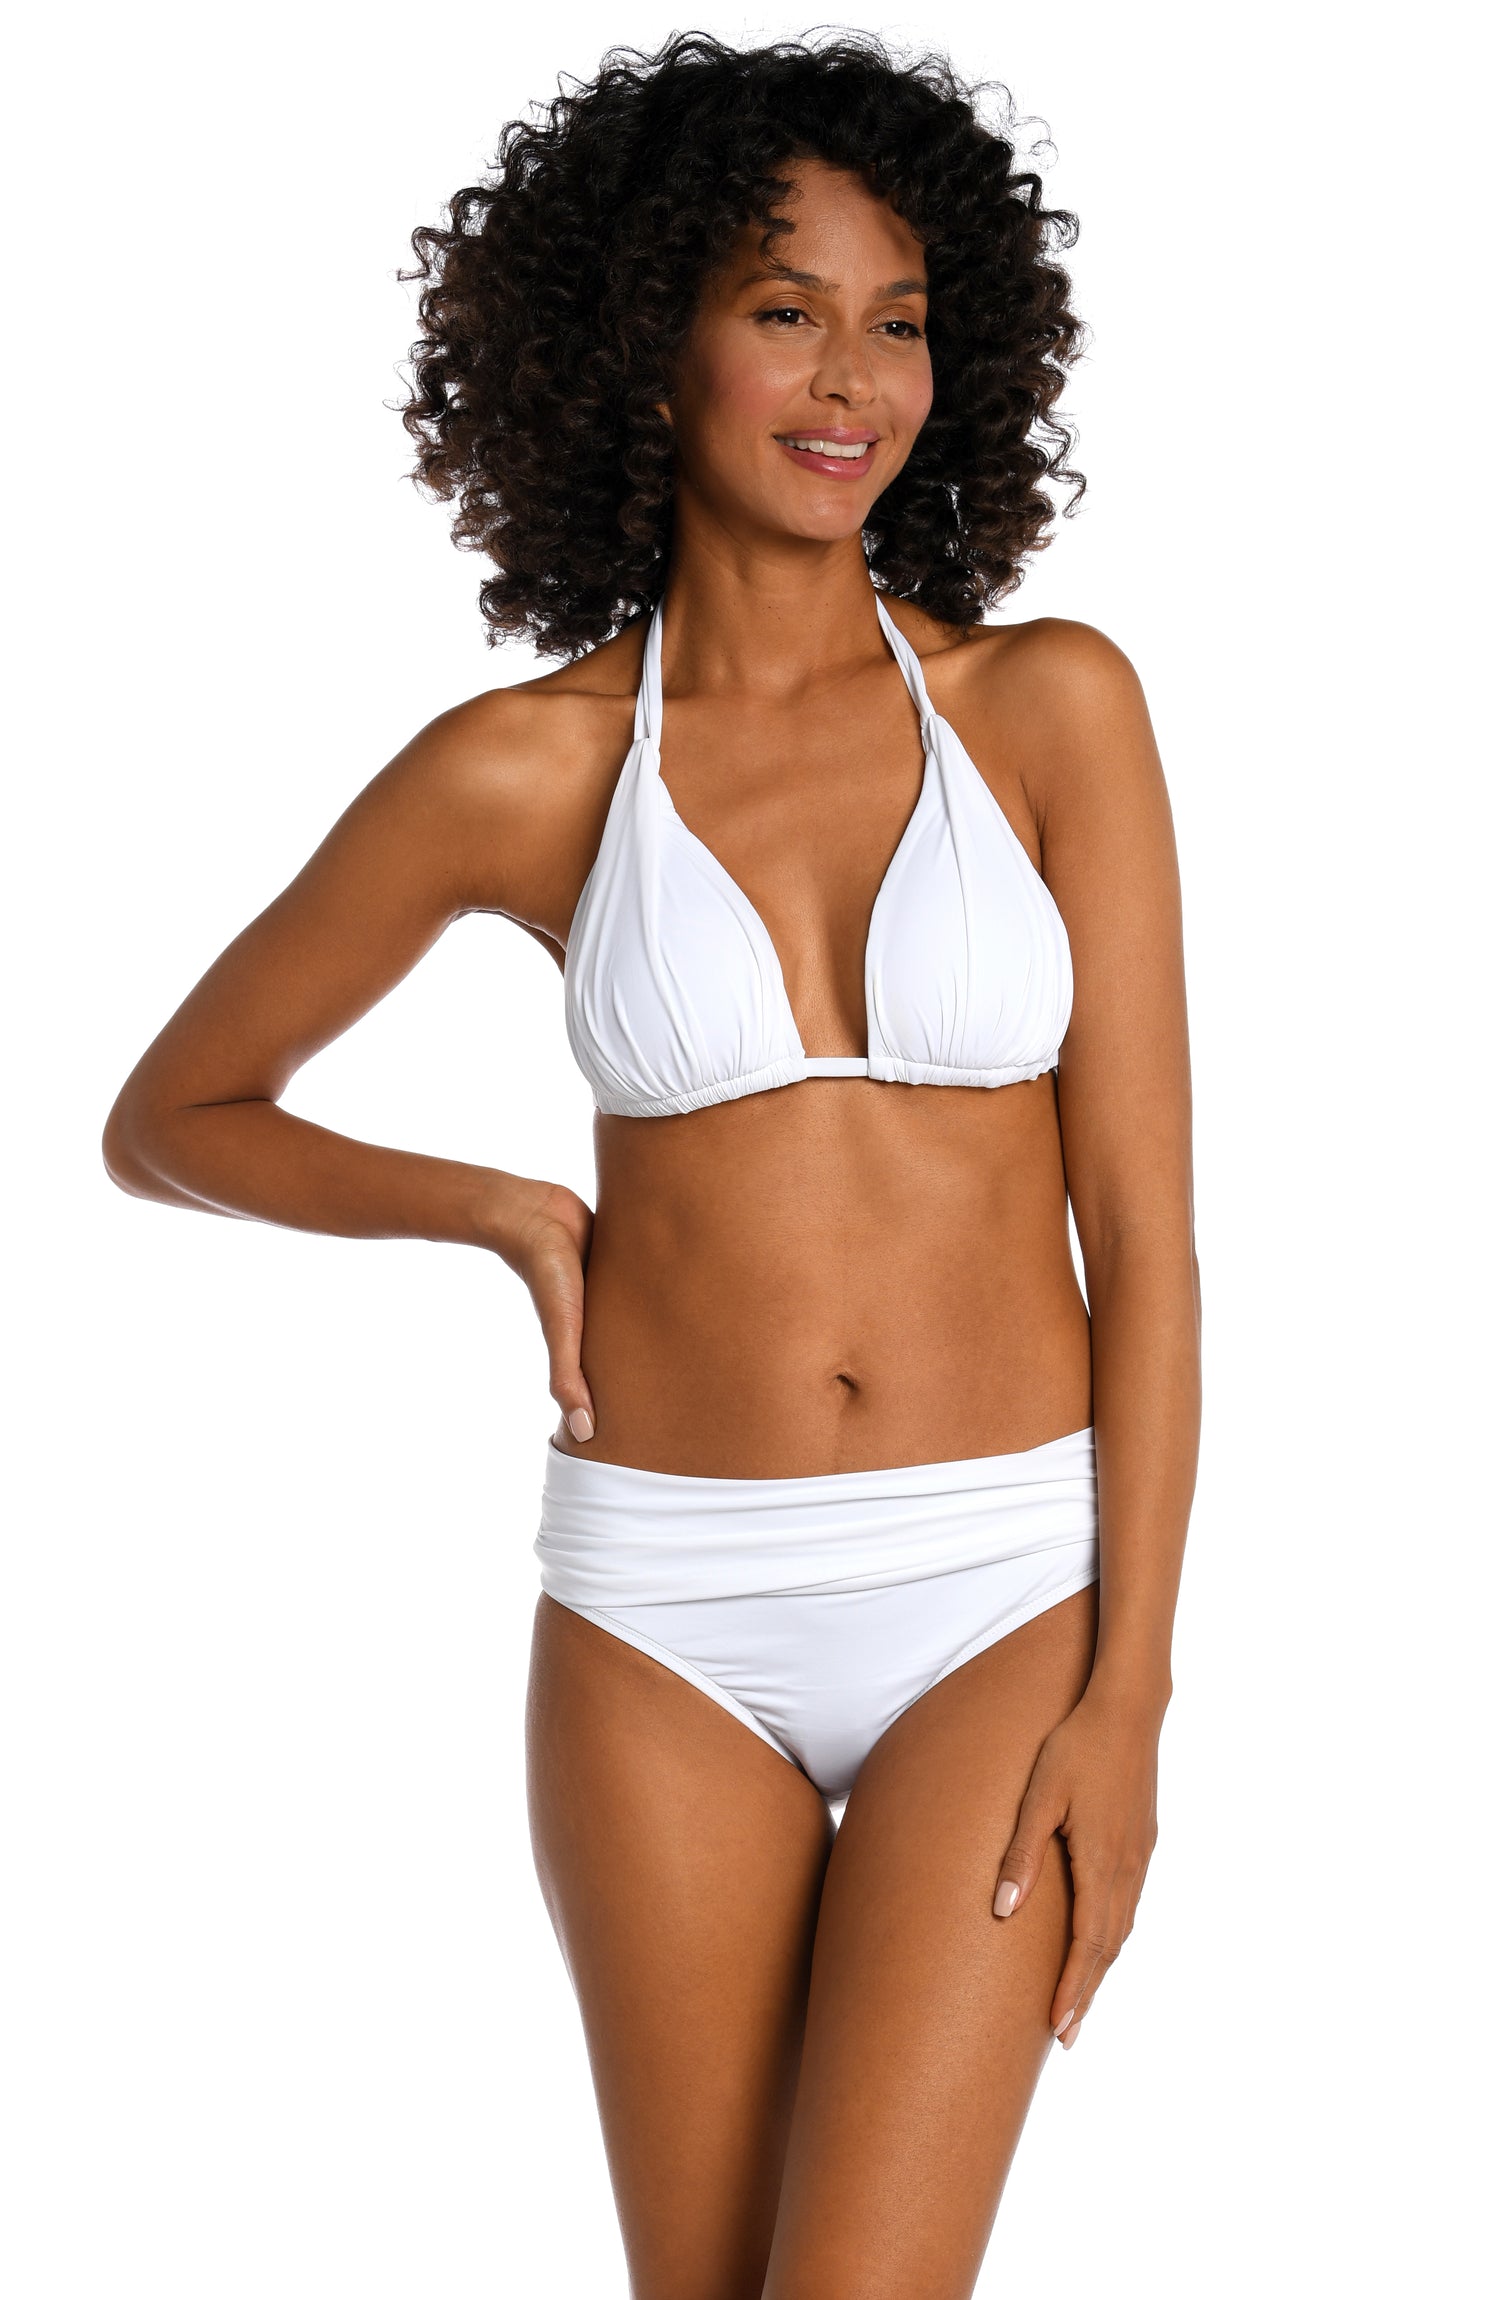 Model is wearing a white halter triangle swimsuit top from our Best-Selling Island Goddess collection.